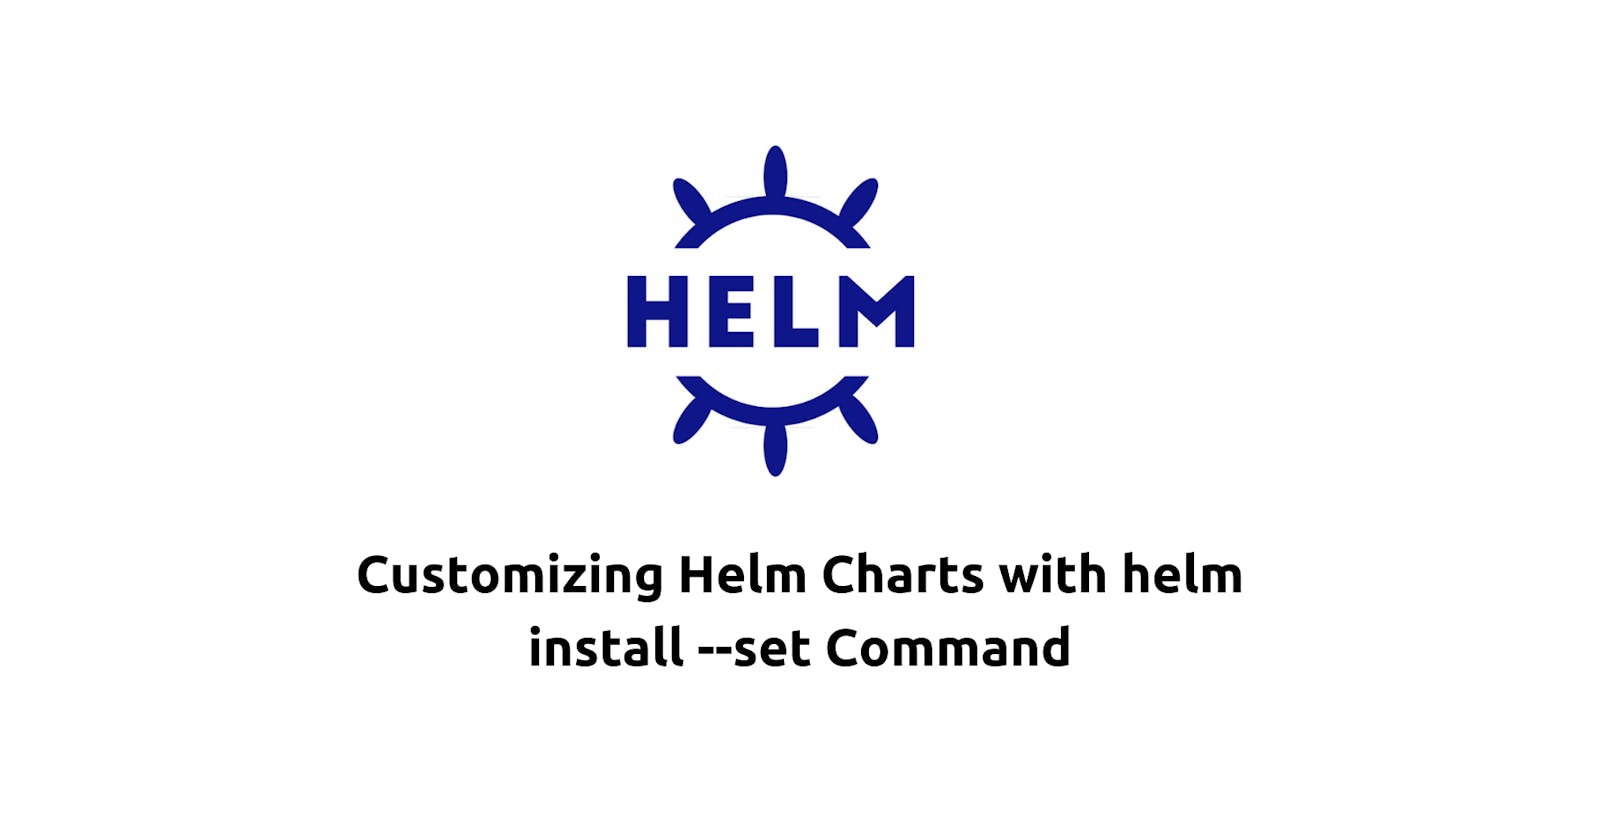 Customizing Helm Charts with helm install --set Command